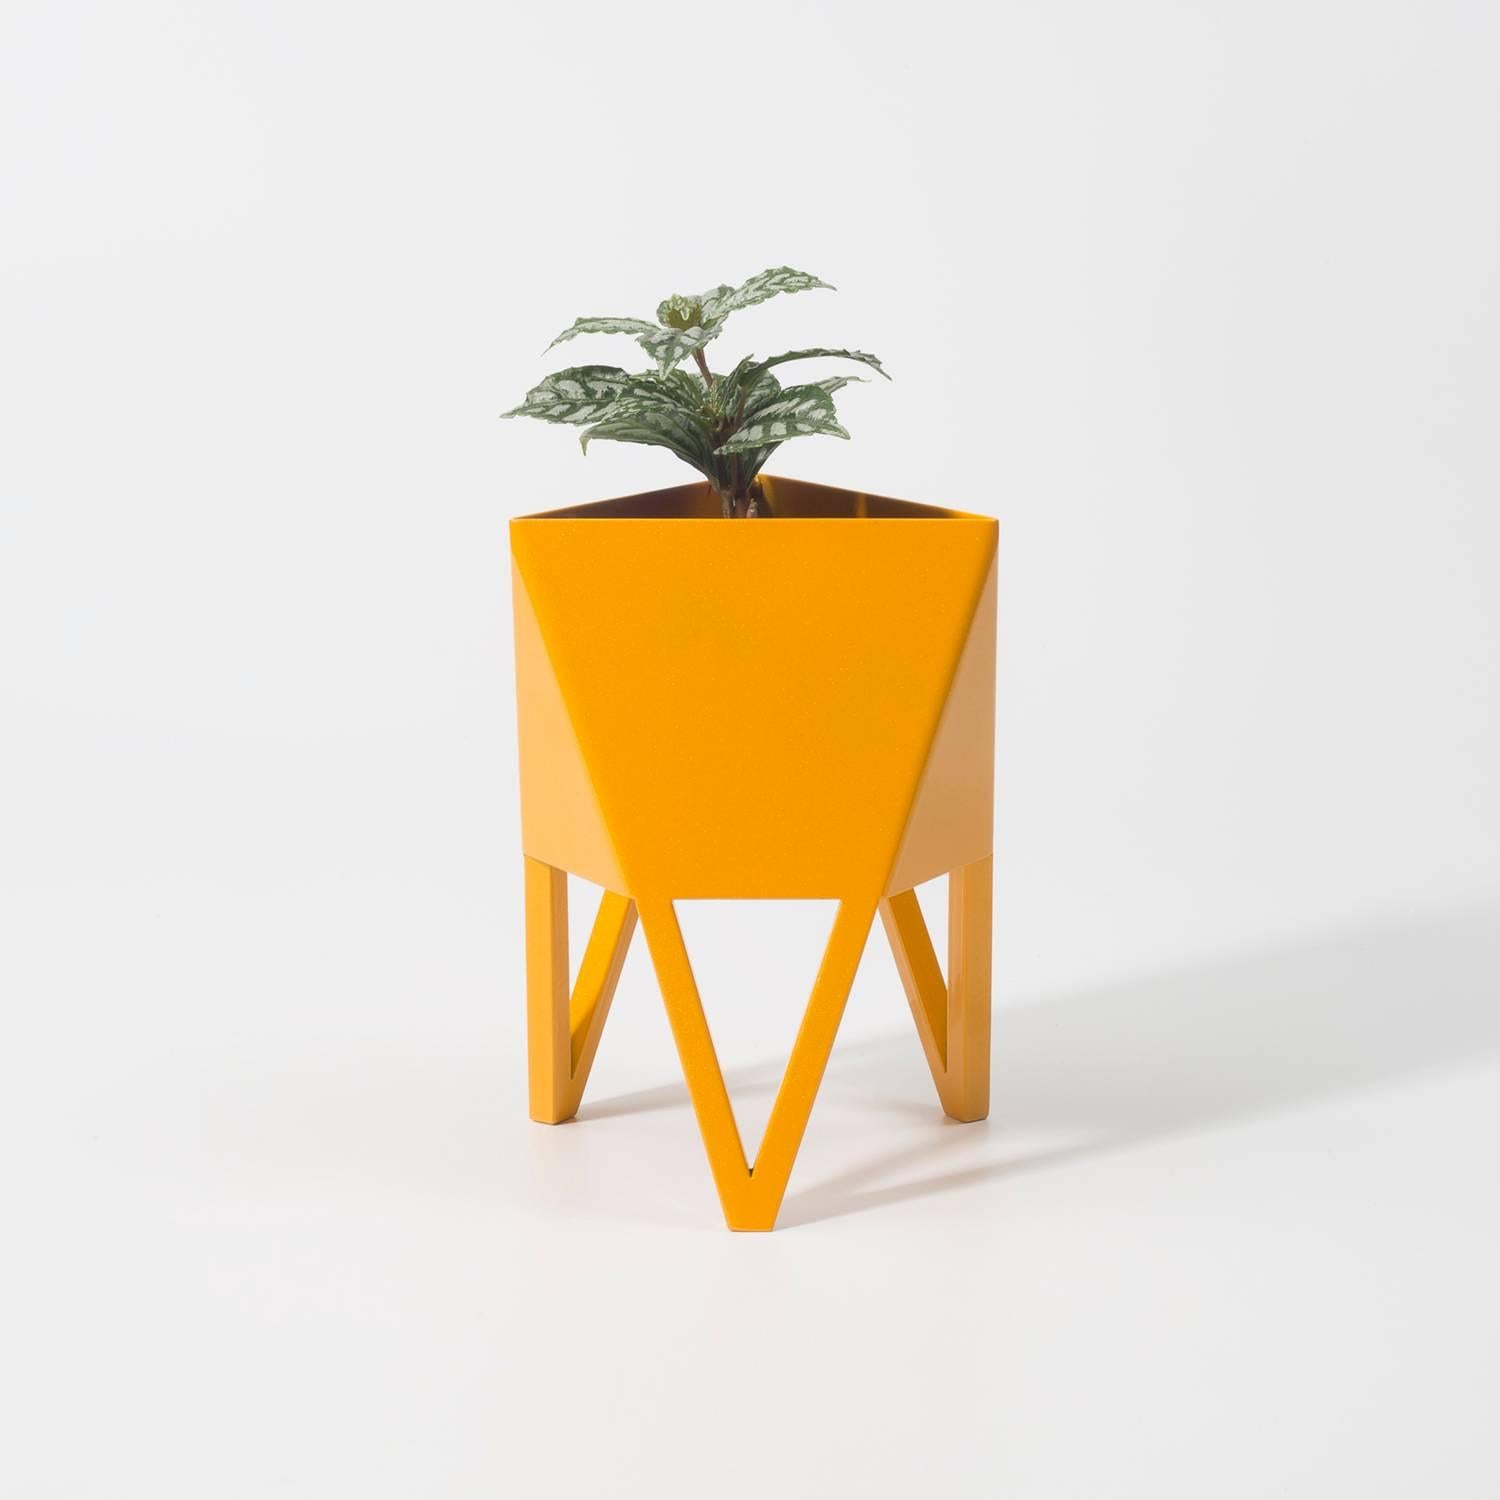 Deca Planter in Bluegreen Steel, Large, by Force/Collide 6